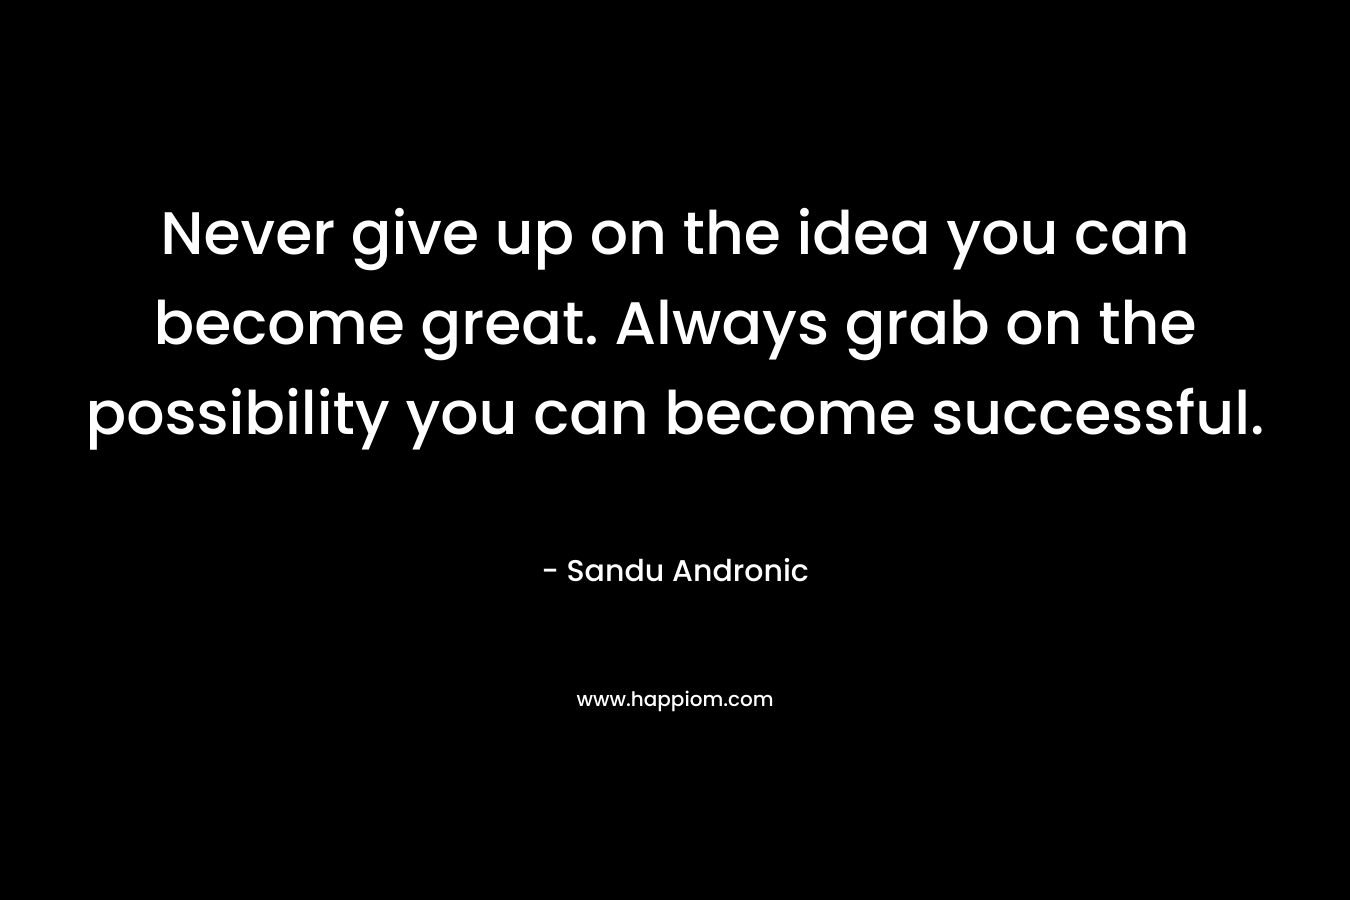 Never give up on the idea you can become great. Always grab on the possibility you can become successful. – Sandu Andronic